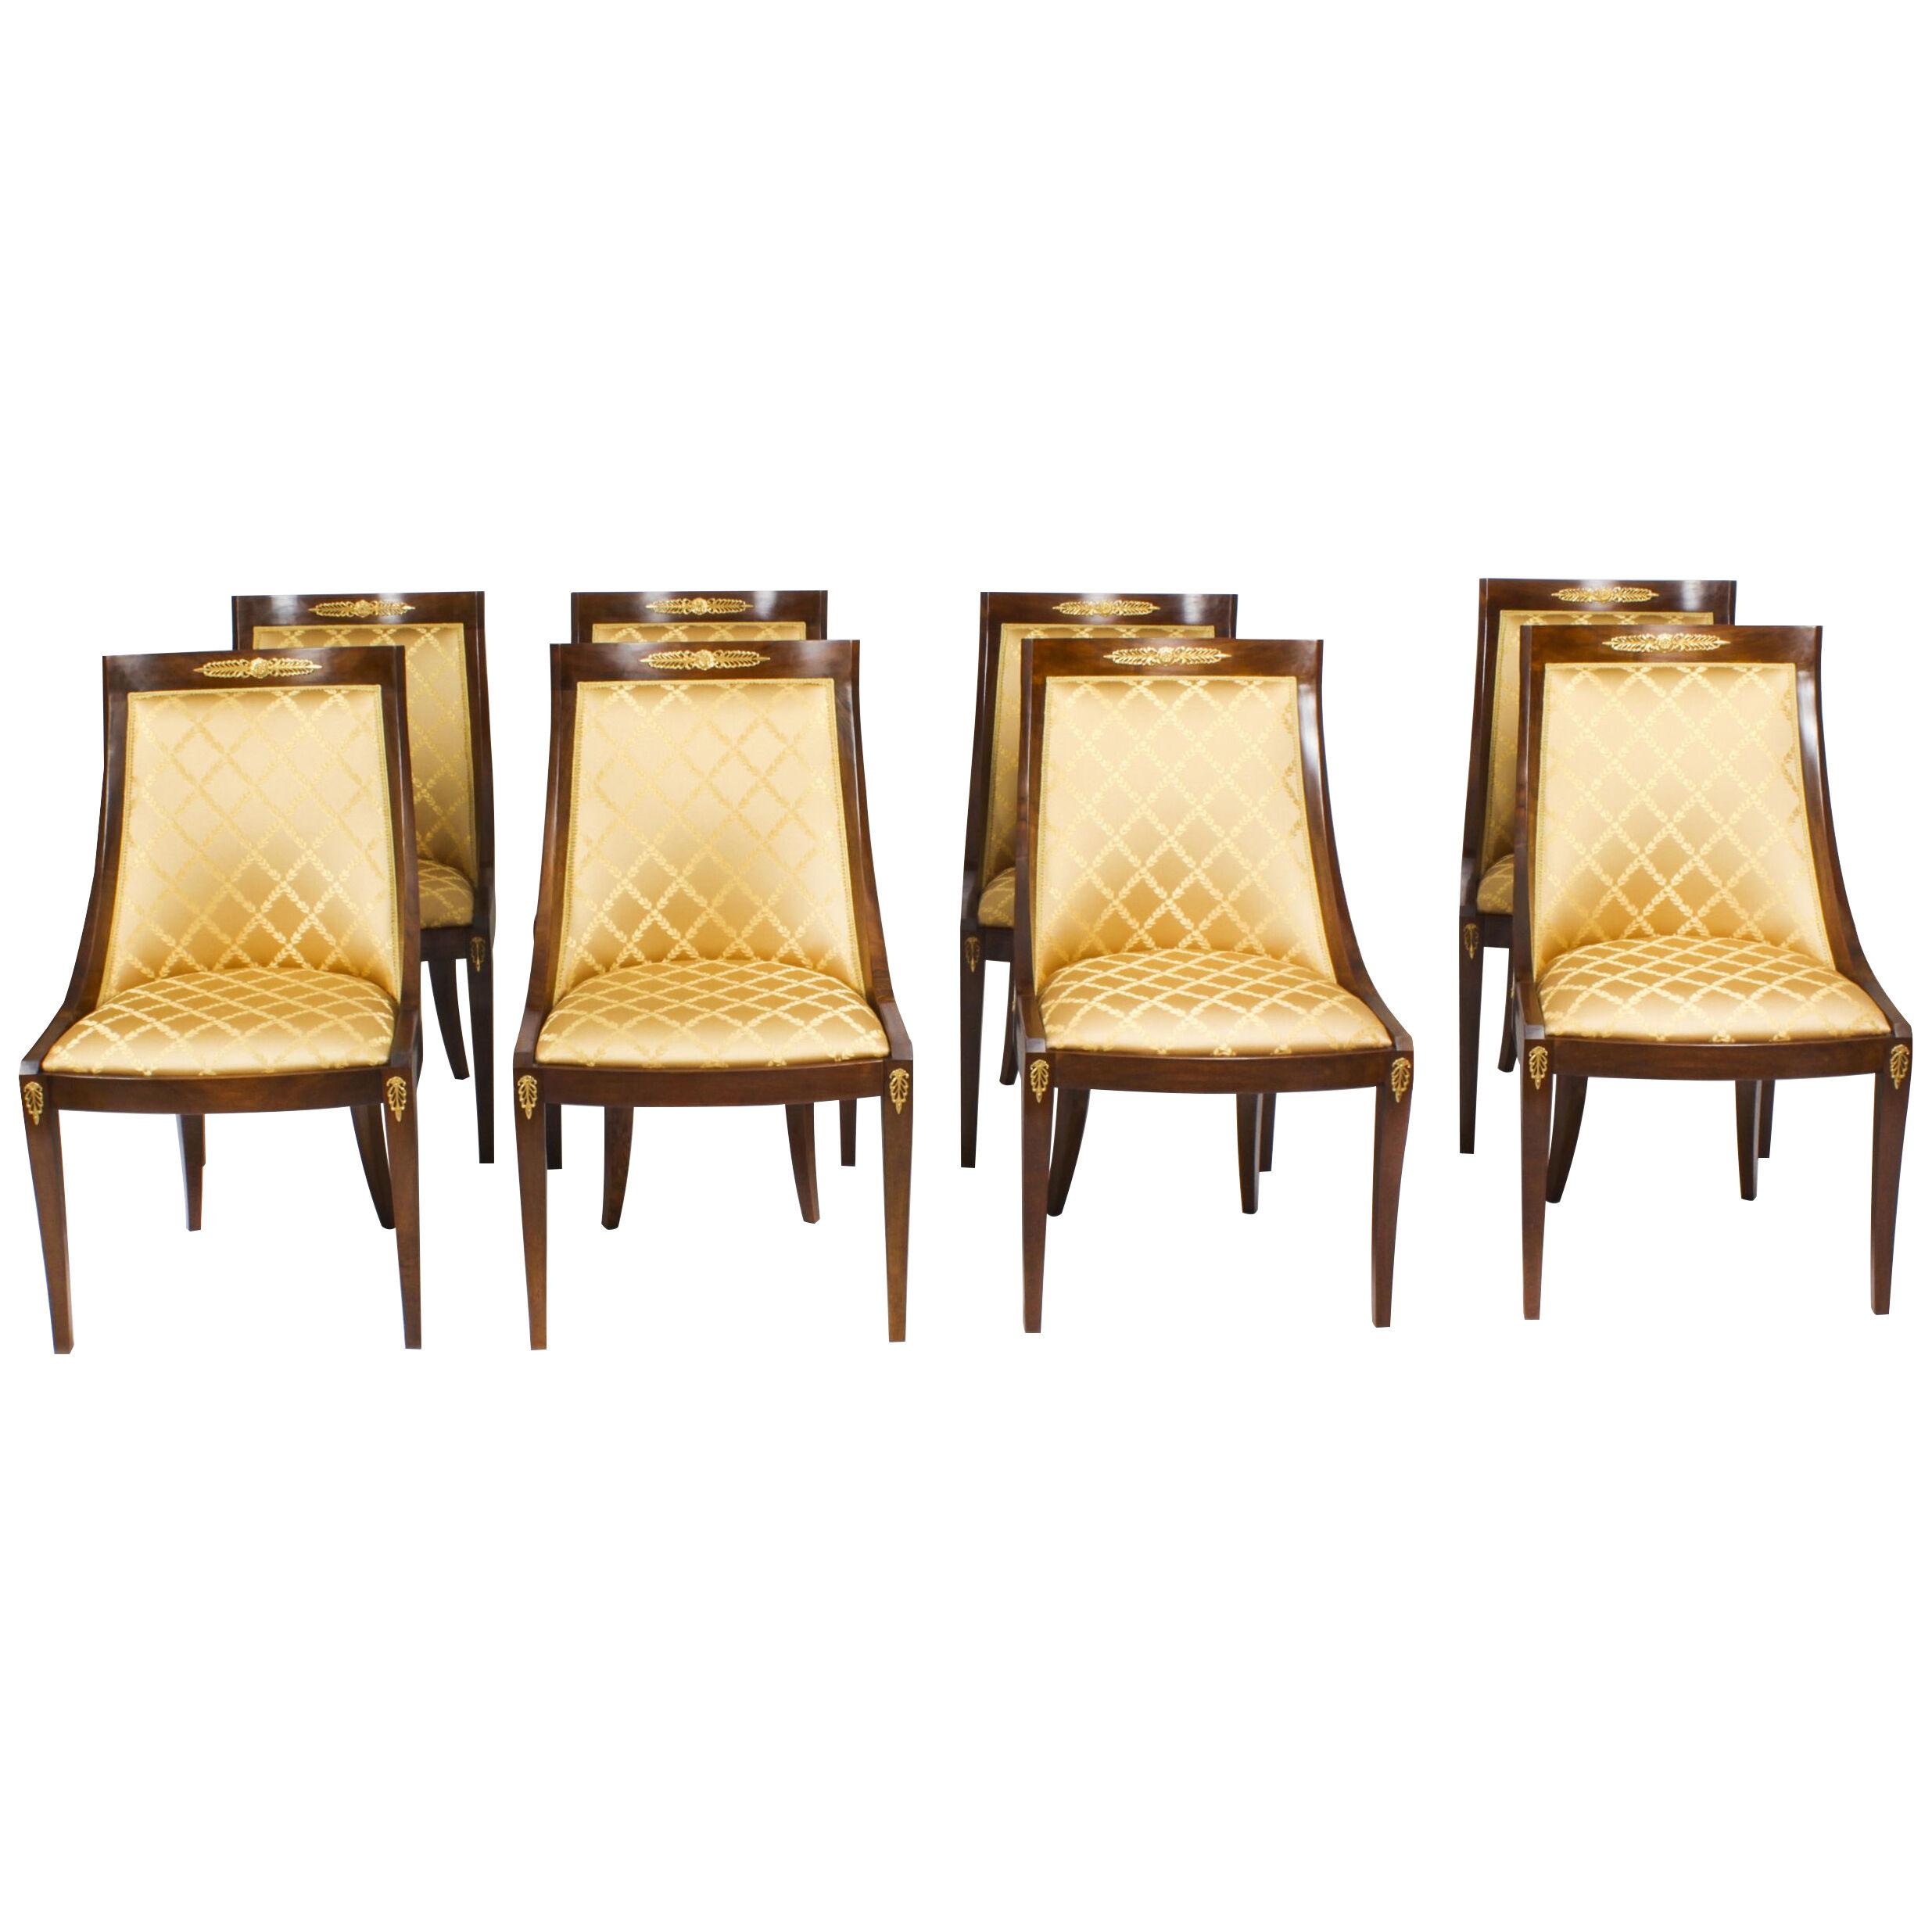 Bespoke Set of Eight French Empire Revival Gondola Dining Chairs